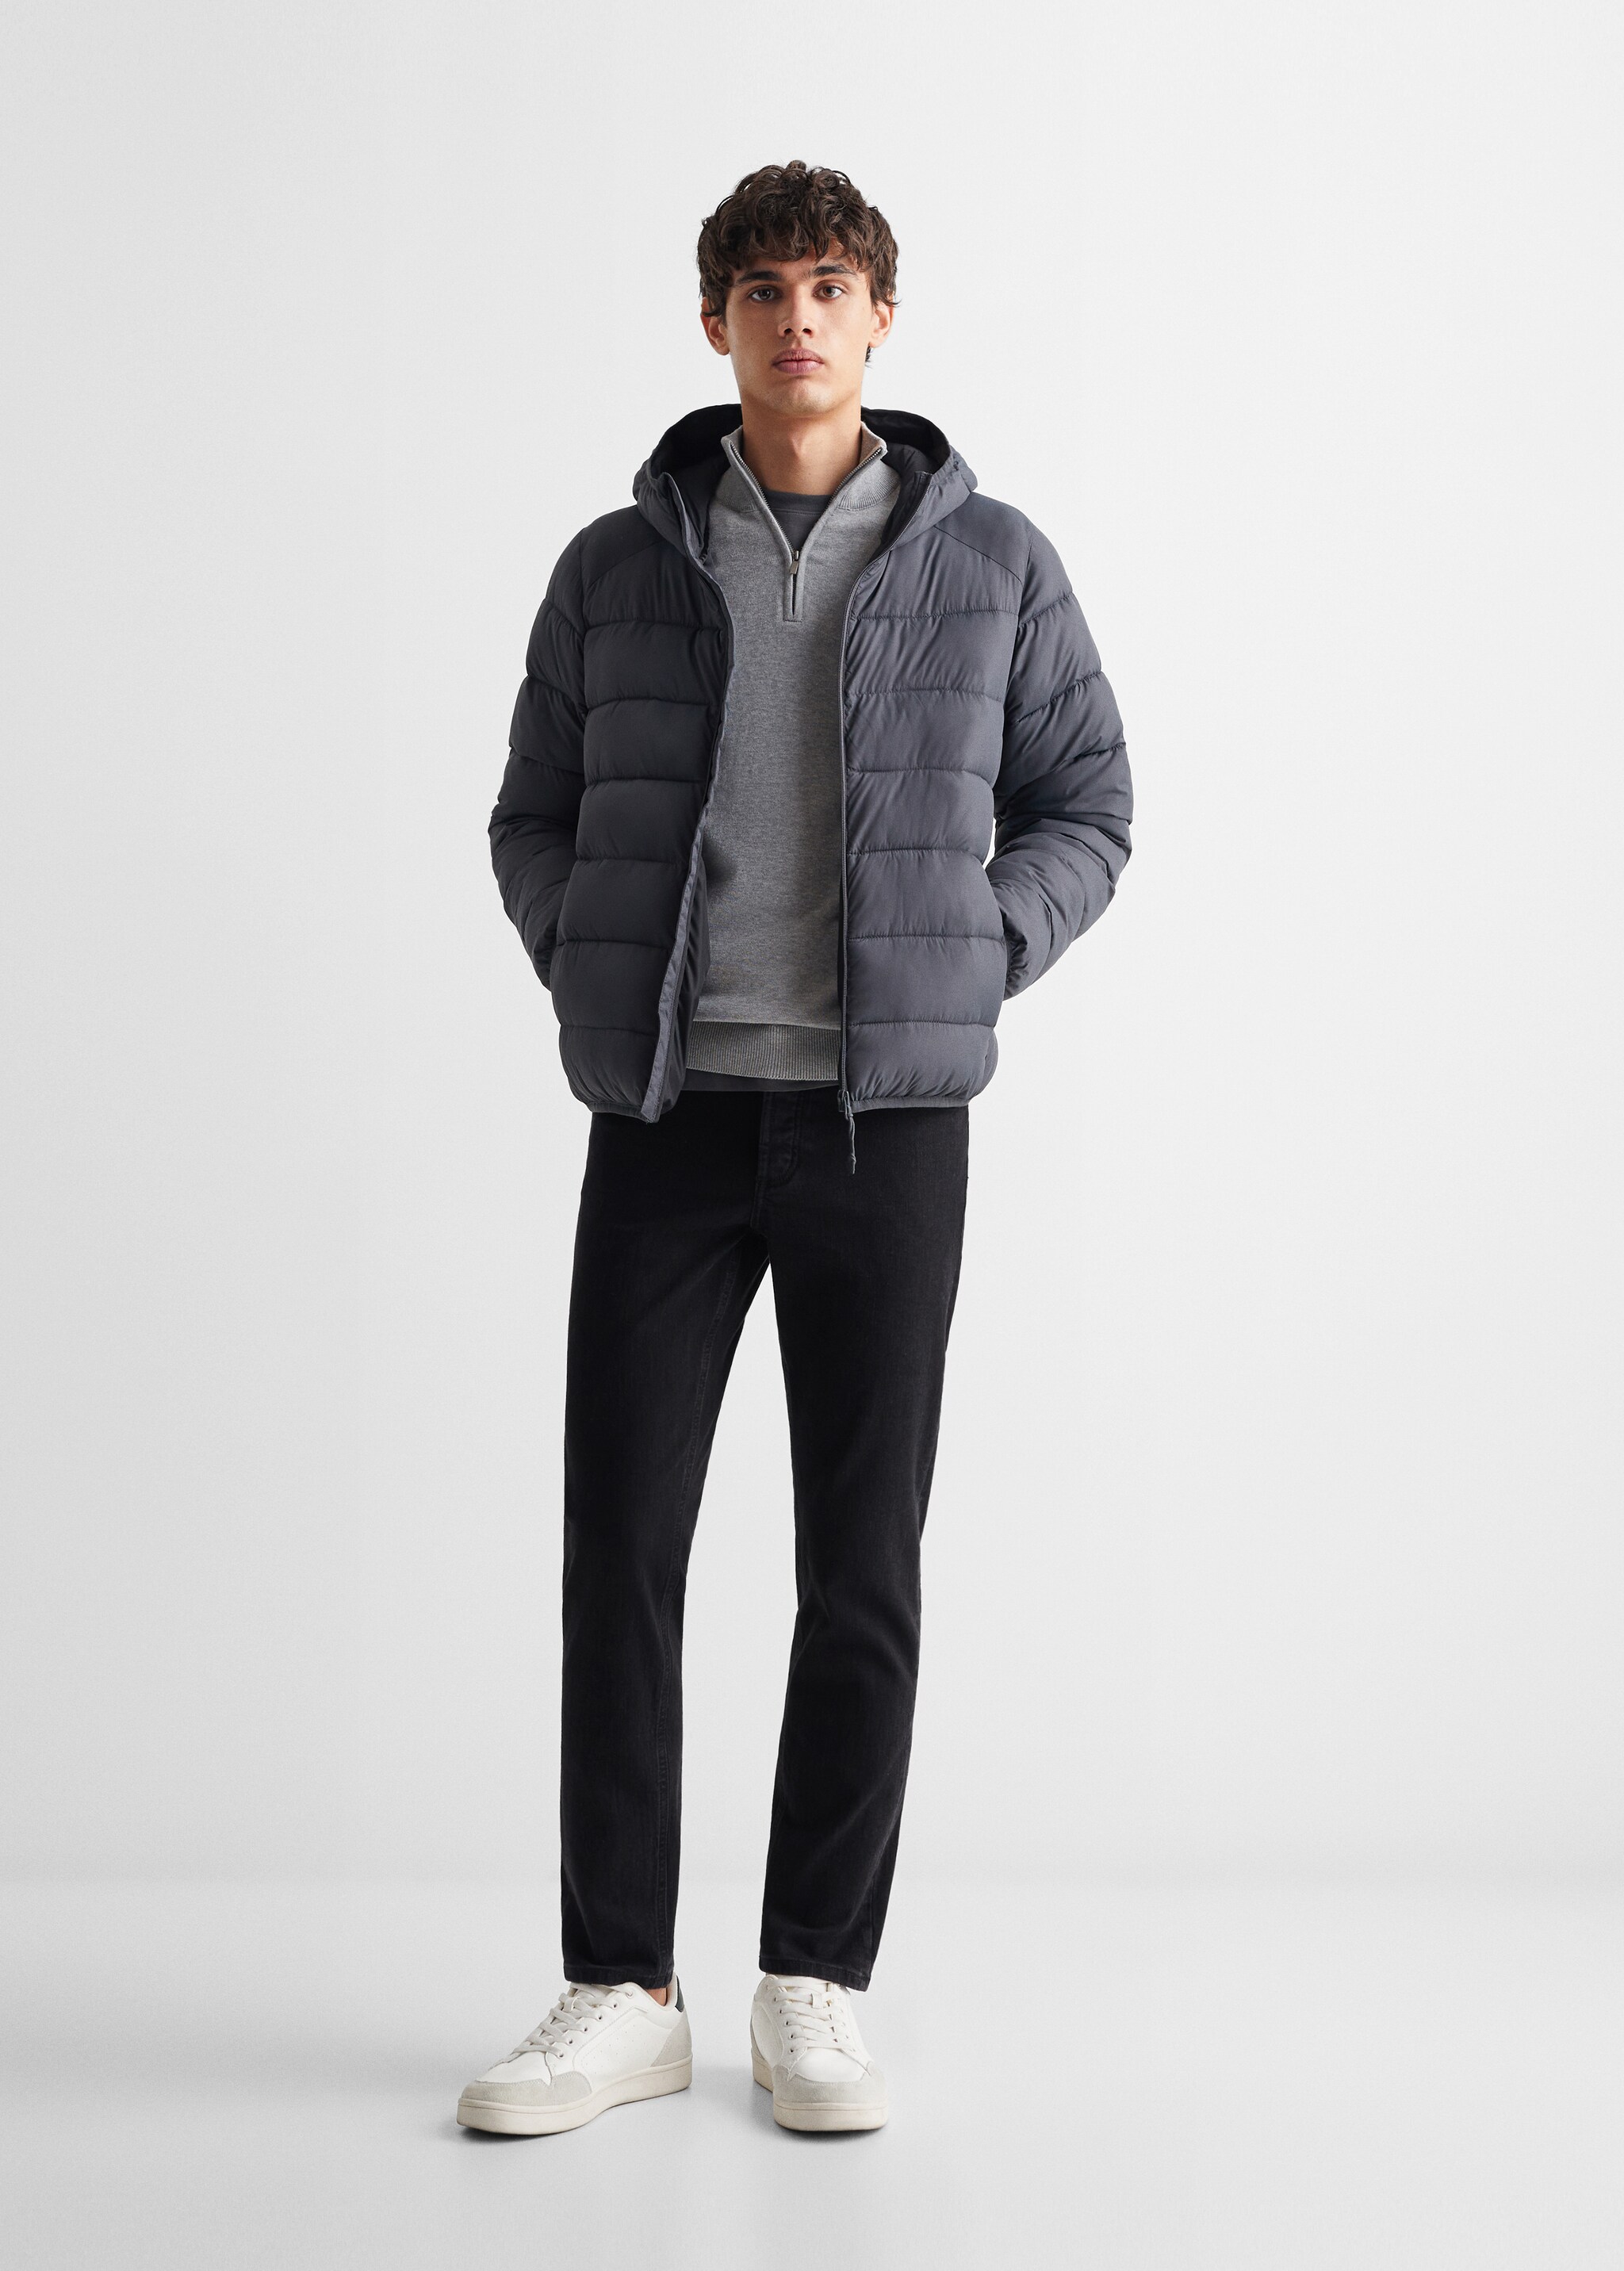 Quilted jacket - General plane